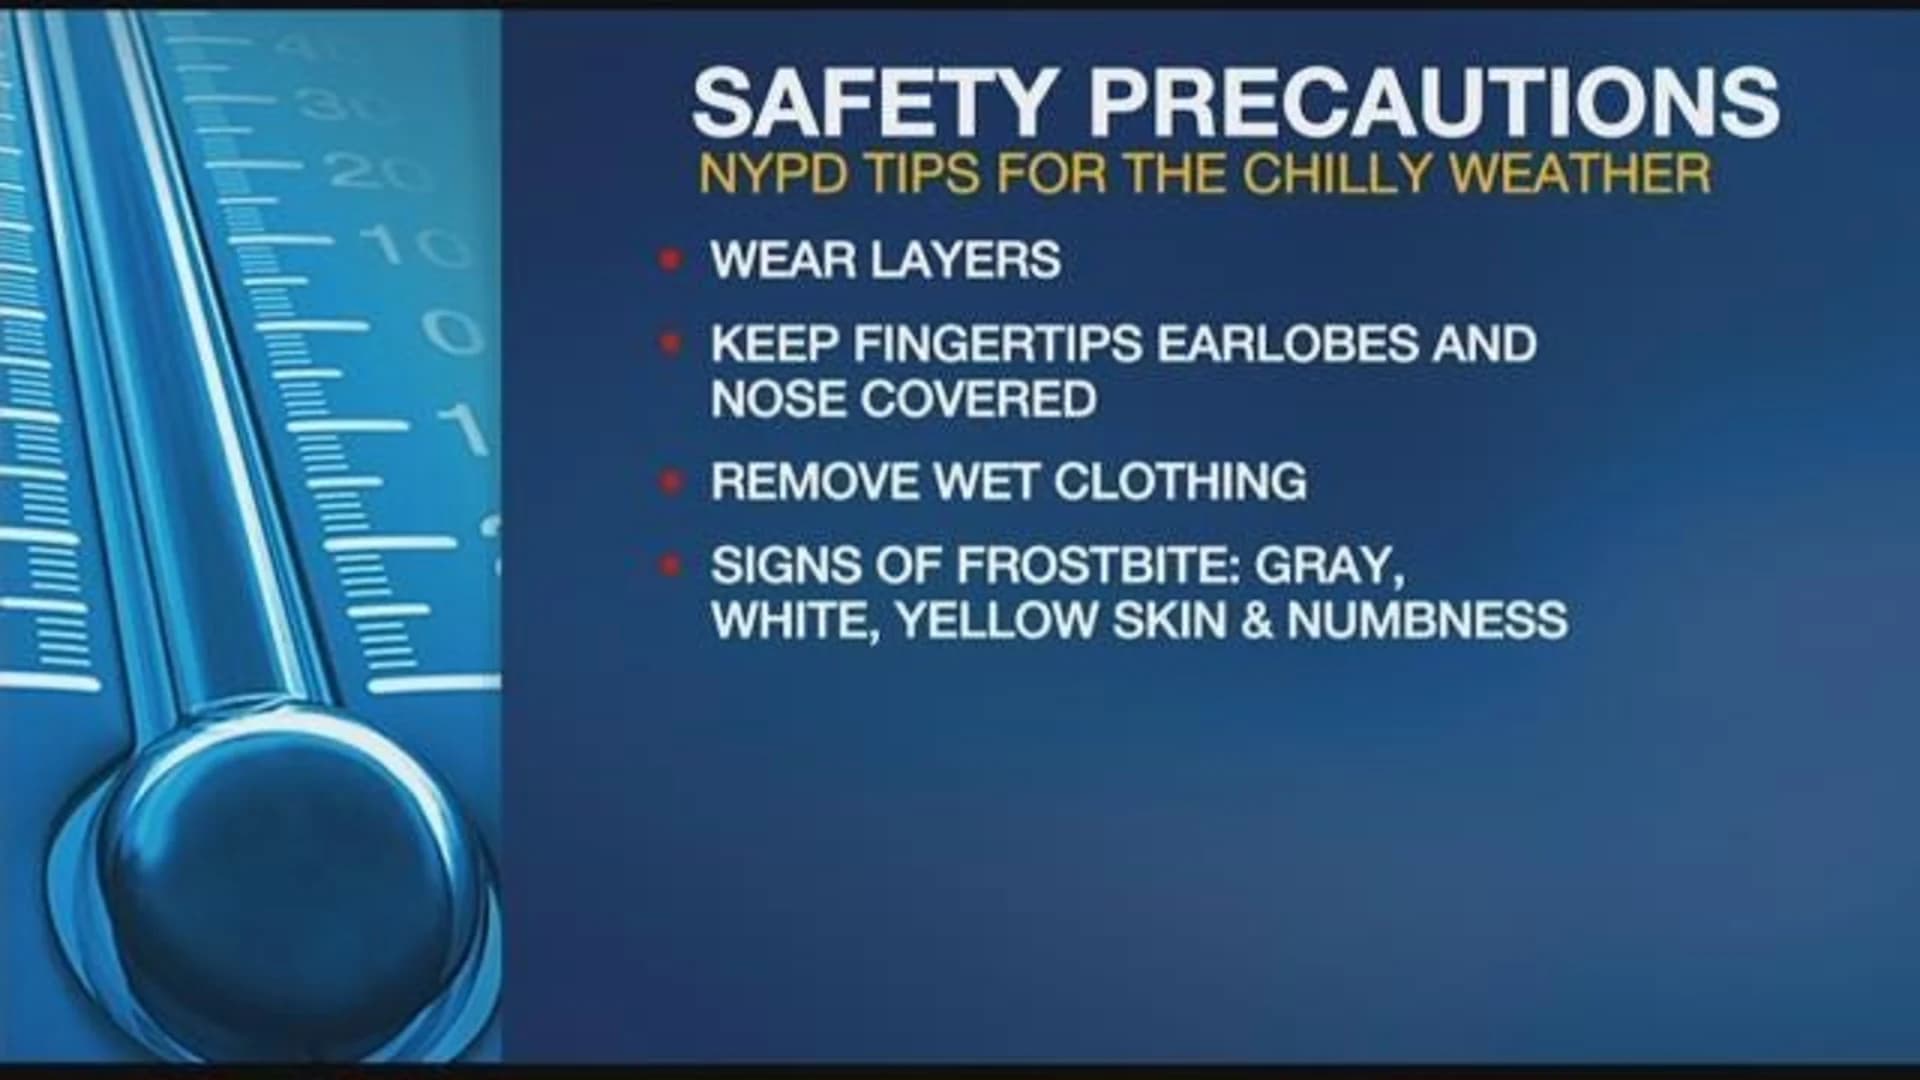 Officials advise residents to take precautions against dangerous windchill